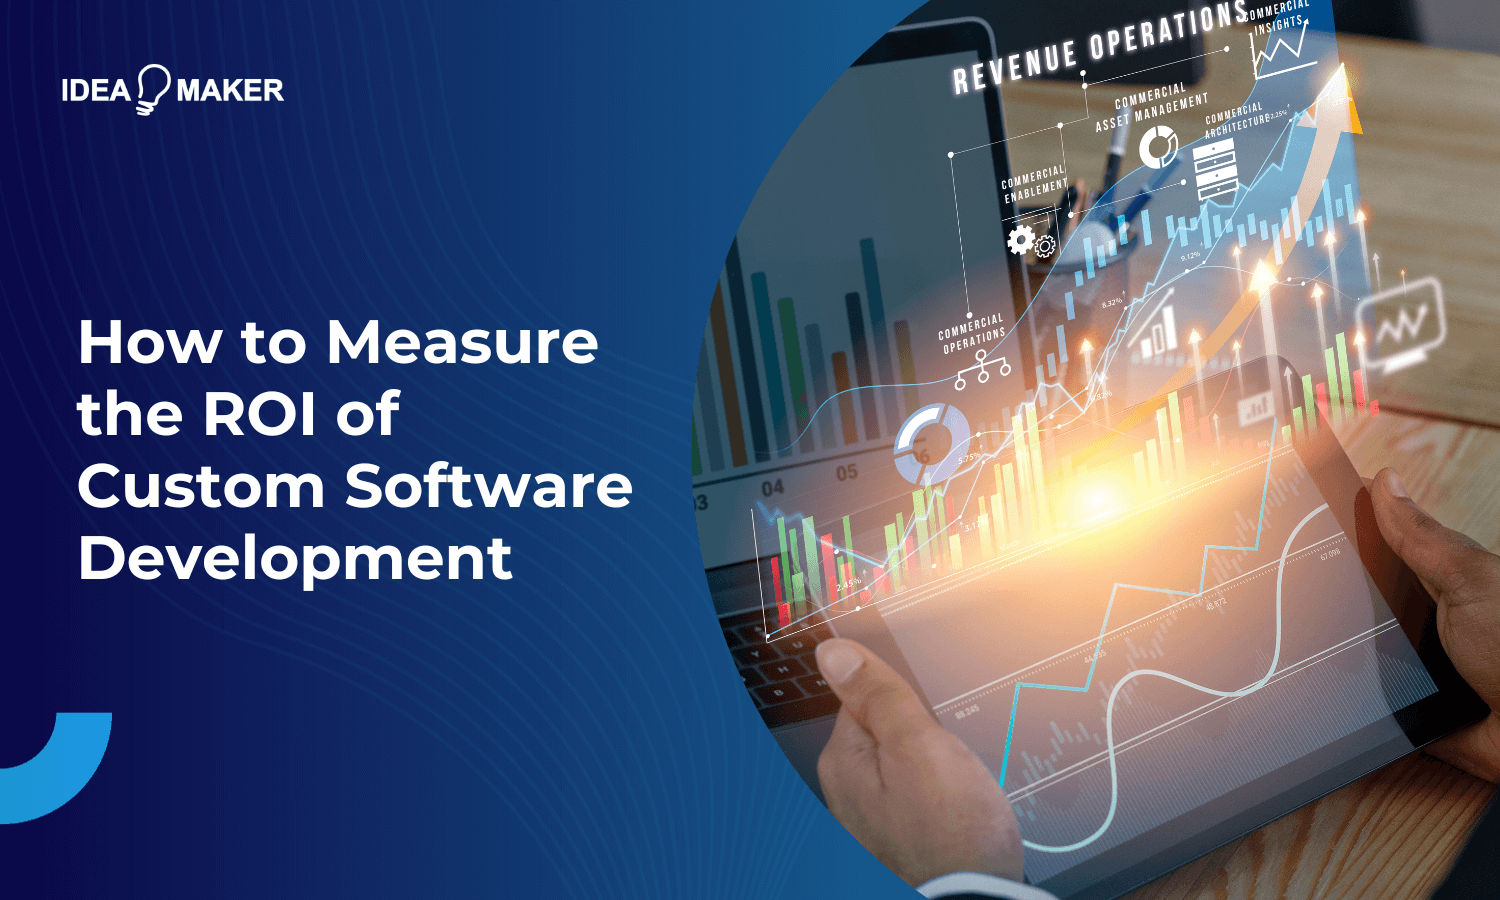 How to Measure the ROI of Custom Software Development (1)